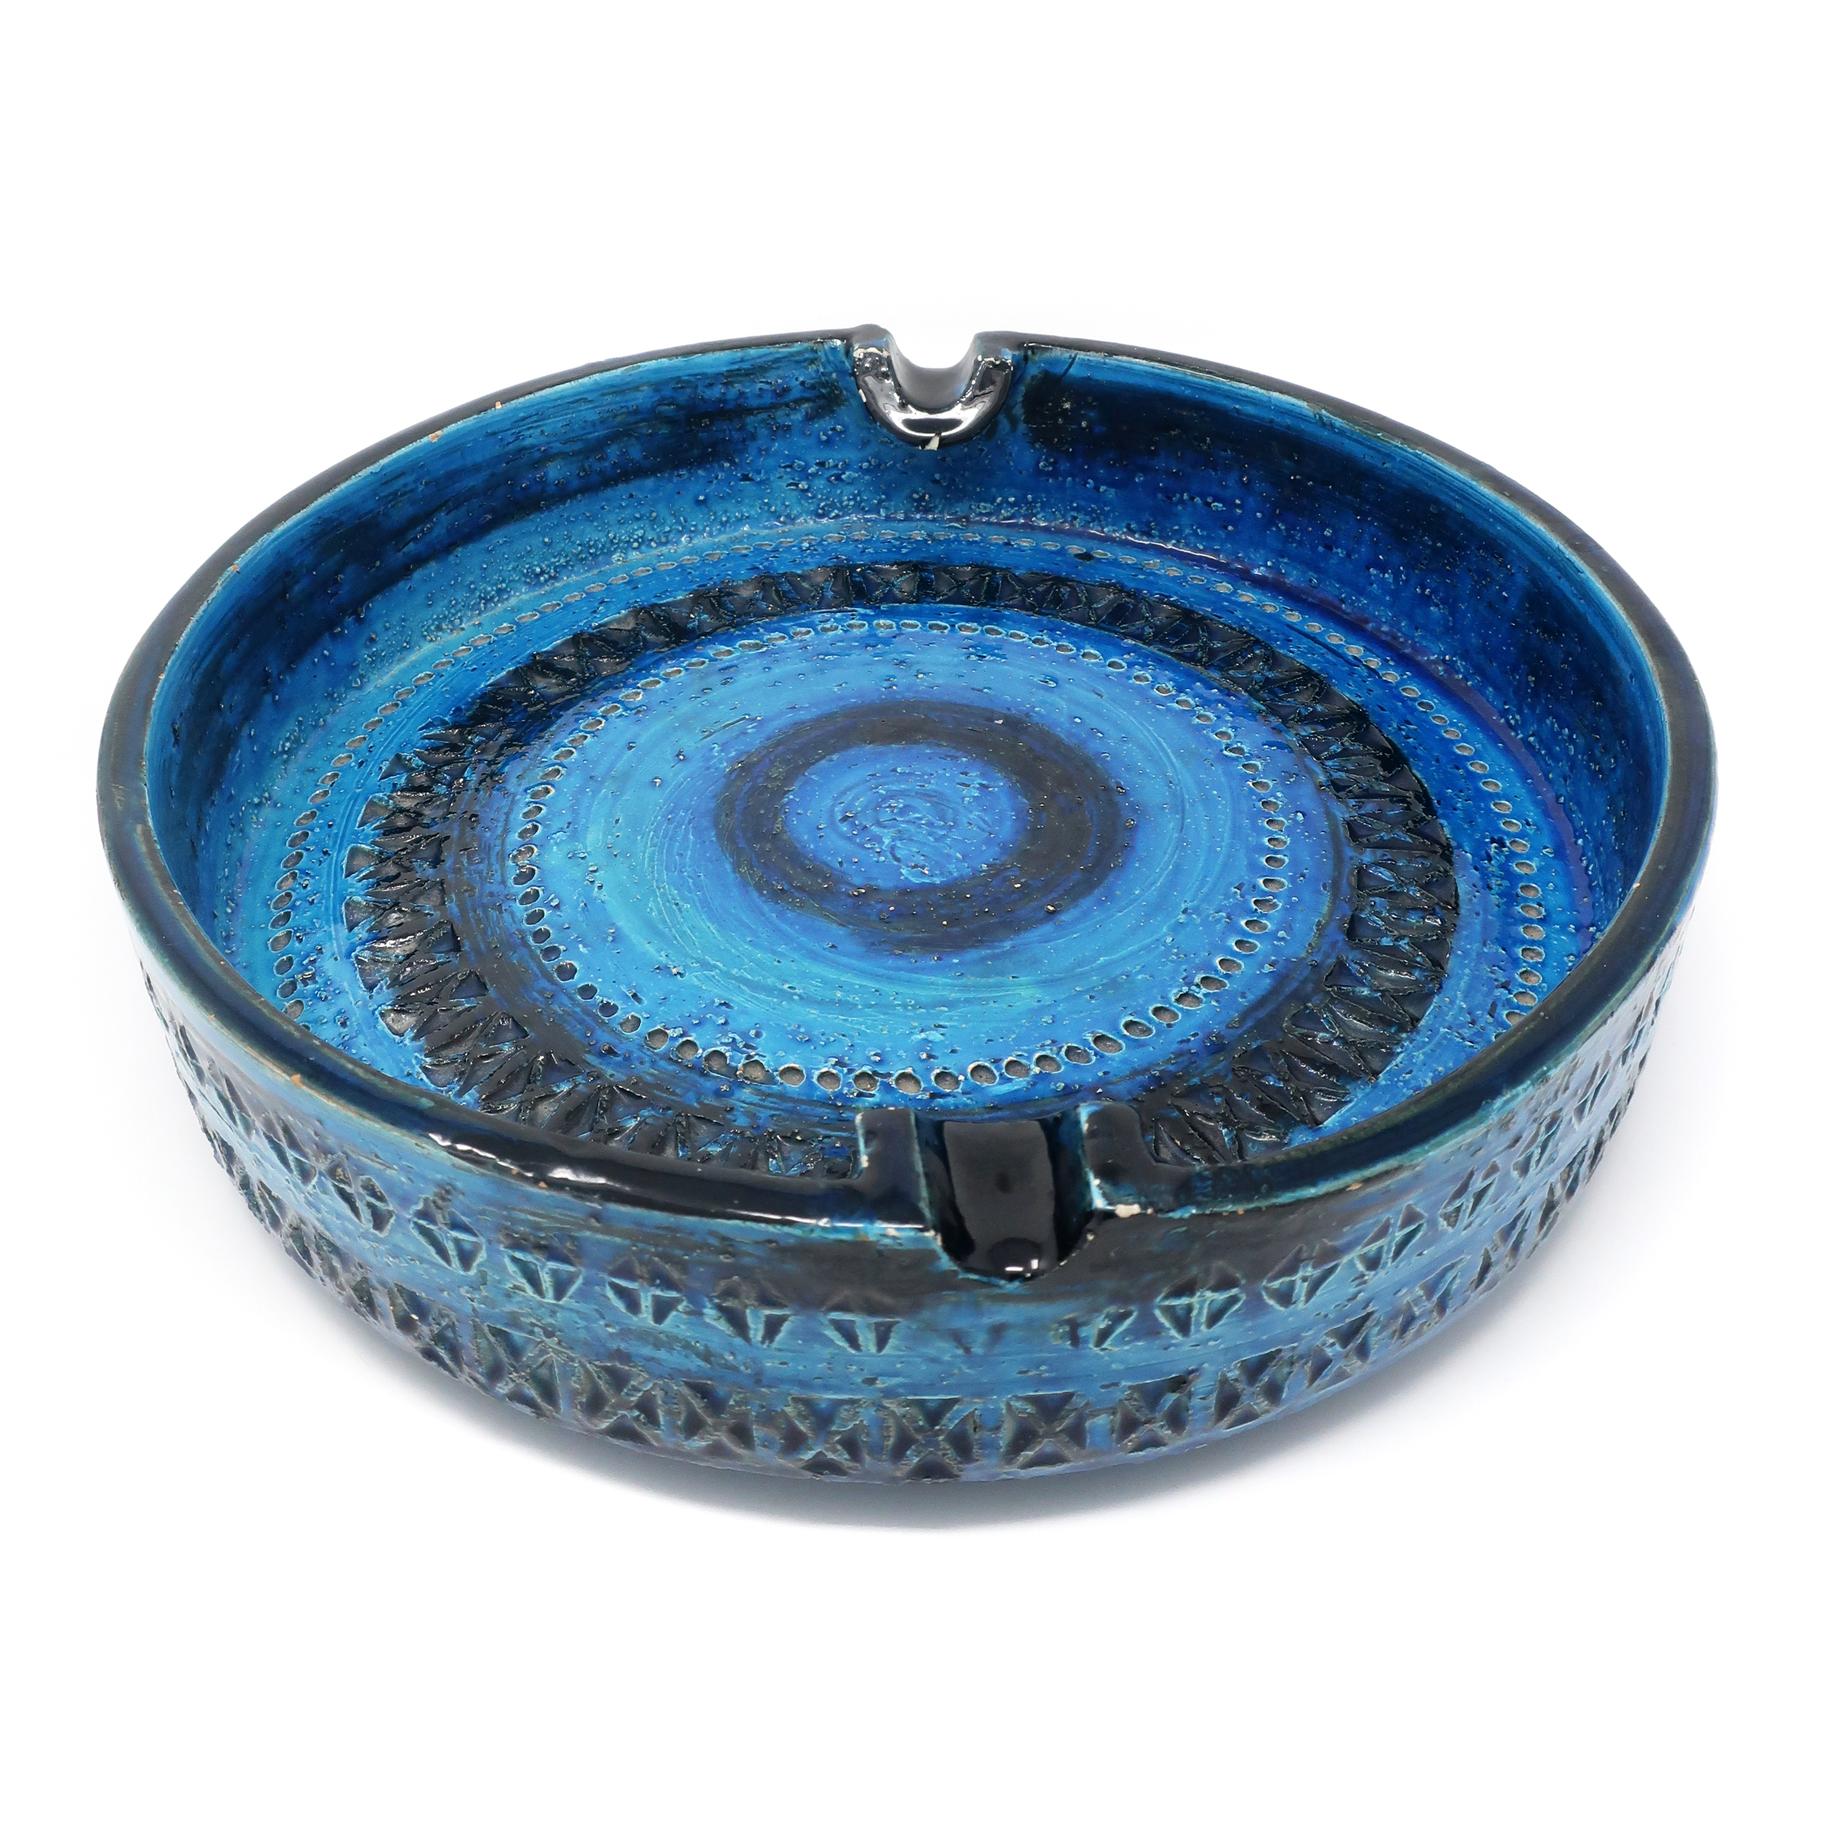 A beautiful large Rimini blue incised ashtray designed by Aldo Londi for Bitossi. Perfect for the 1960s smoking swagger enthusiast or as a decorative centerpiece or catchall. Glaze is bright and in good vintage condition with wear consistent with